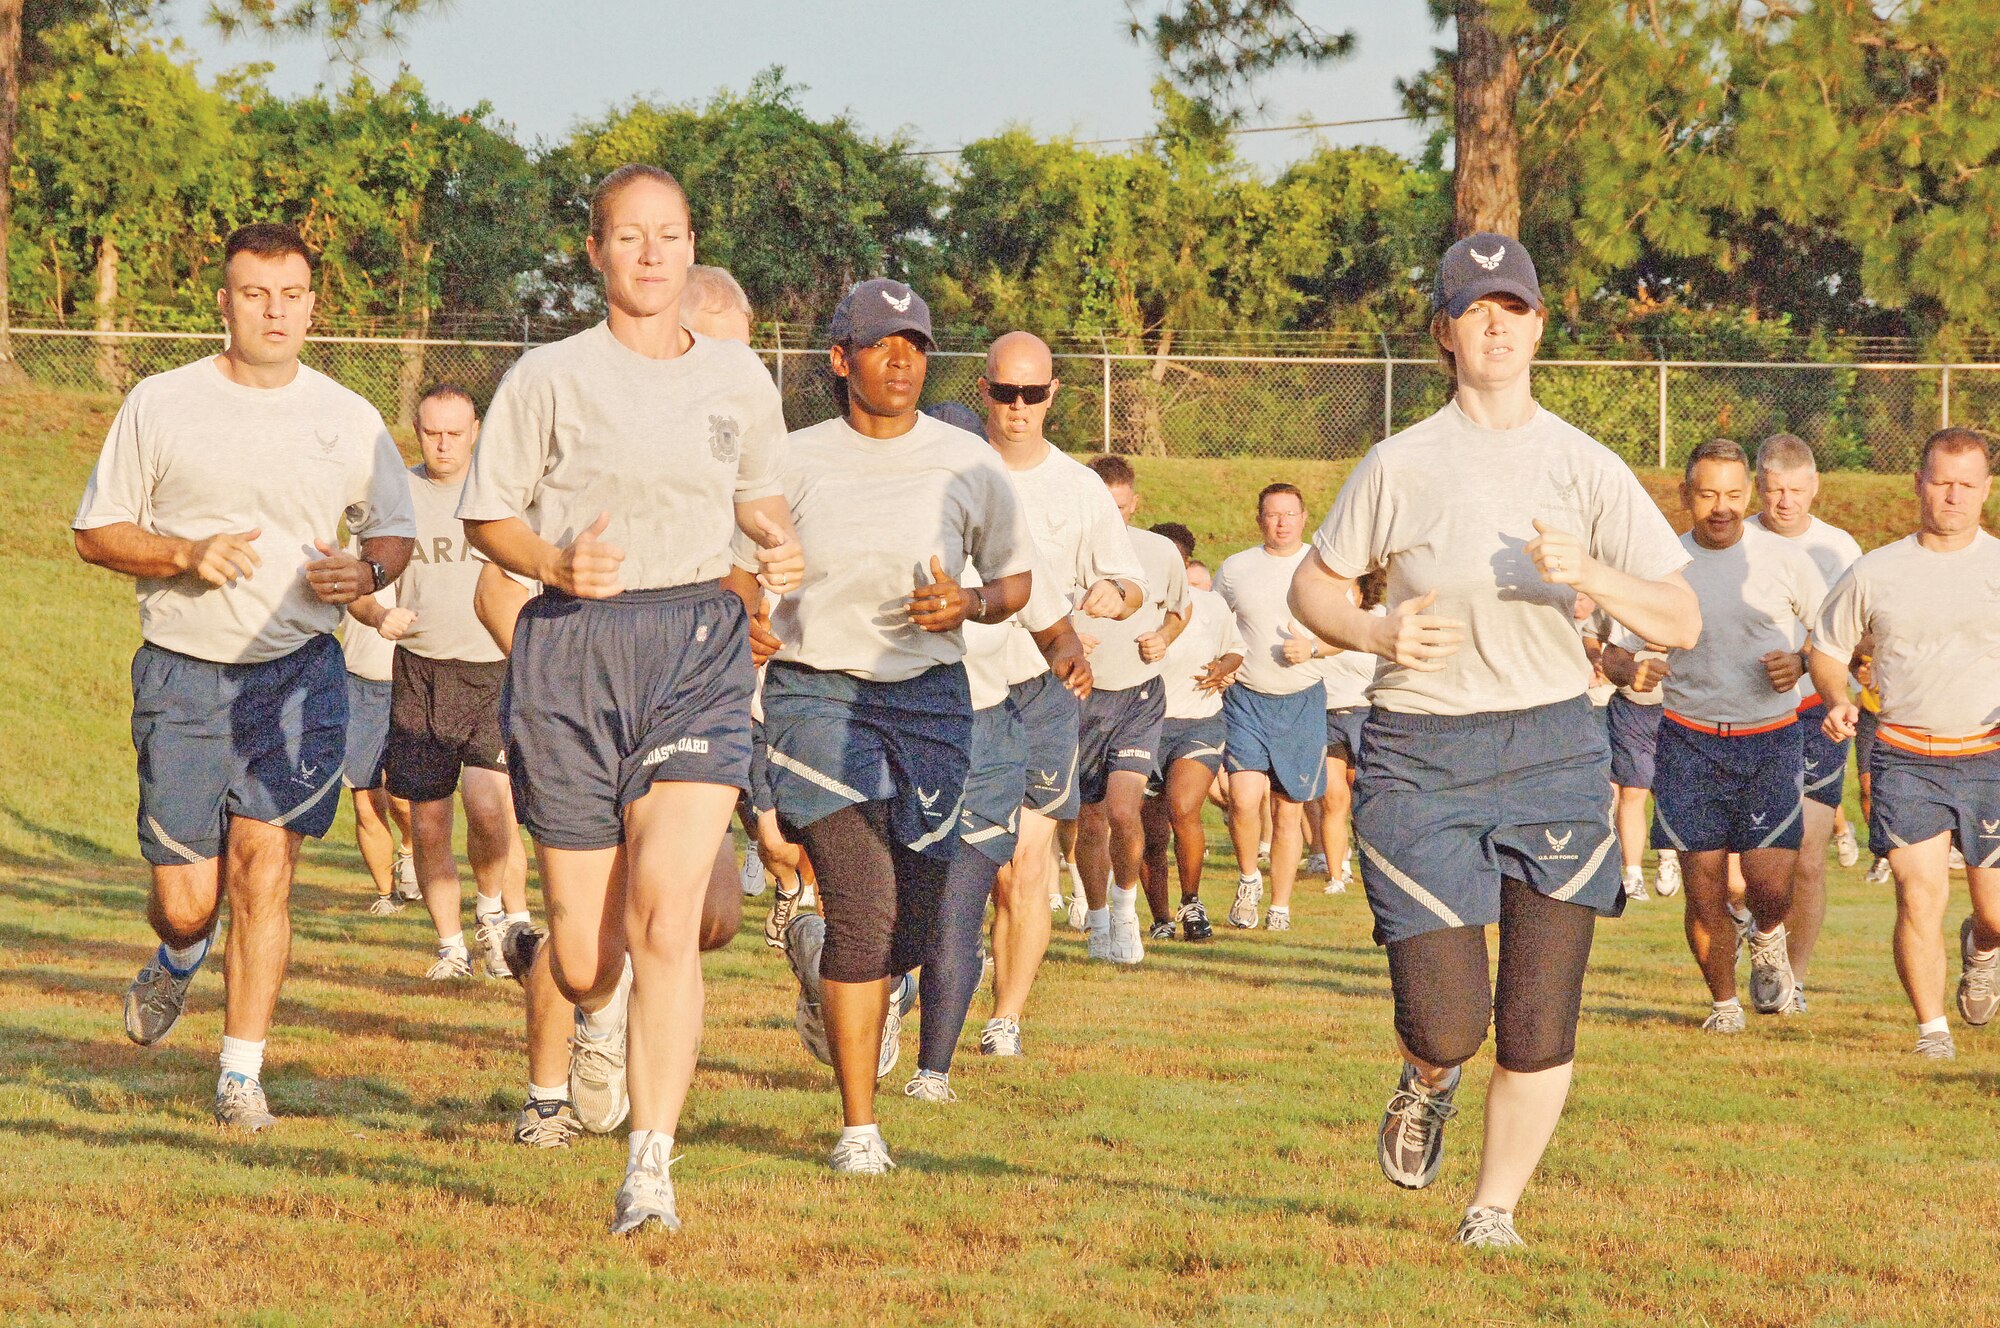 Senior NCO Academy students participate in “Fit to Fight” at the Gunter Bowl last year. Beginning July 1, the Air Force will implement more rigorous standards for PT testing.(U.S. Air Force photo/Donna Burnett)